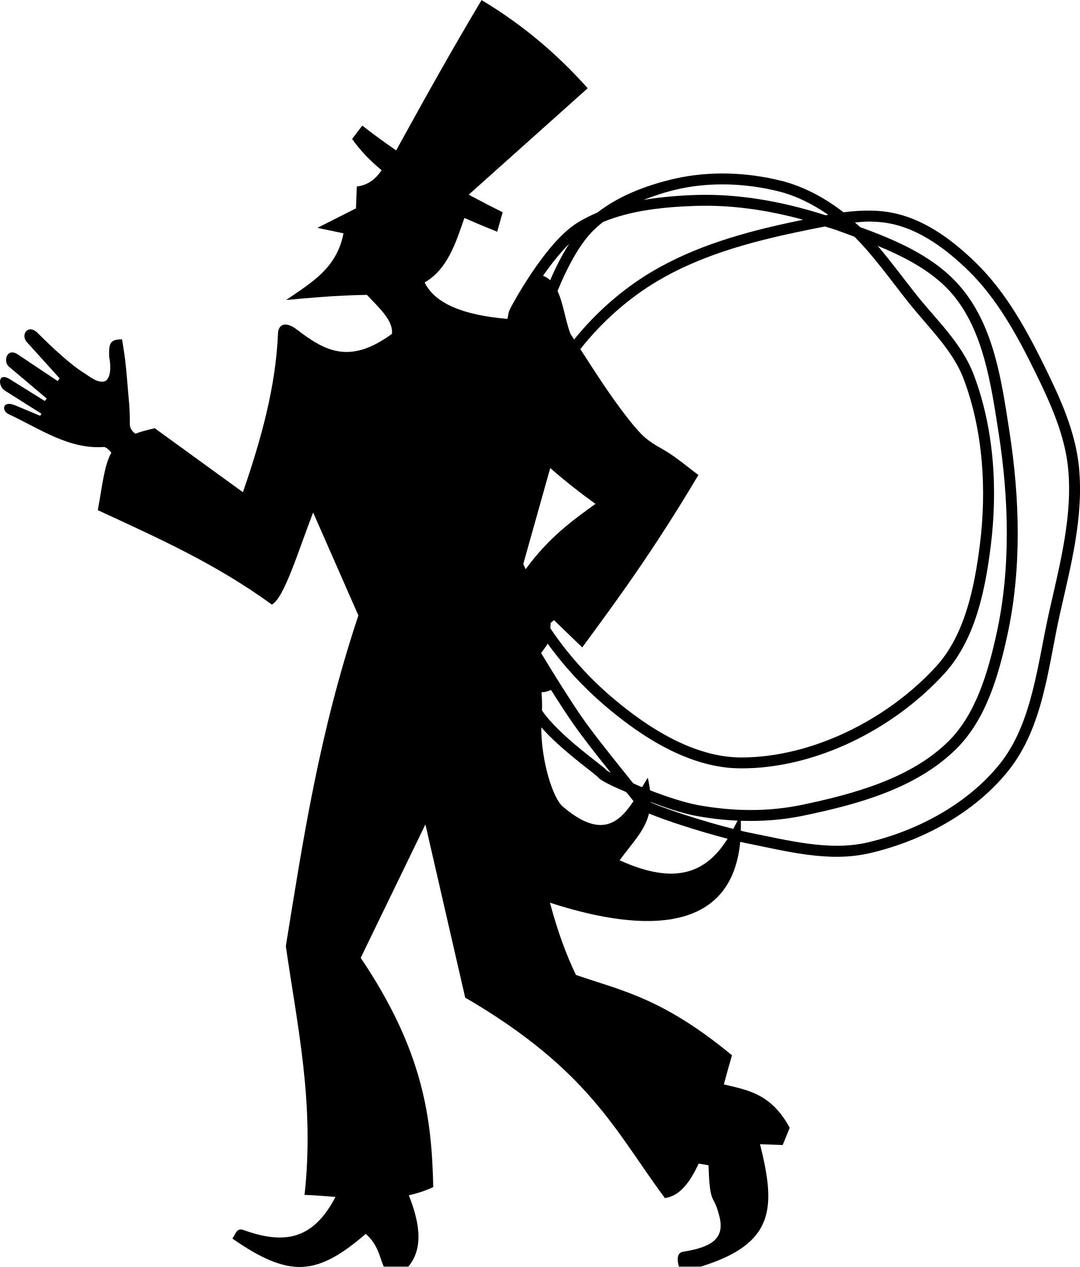 Chimney sweep No1 by Rones png transparent